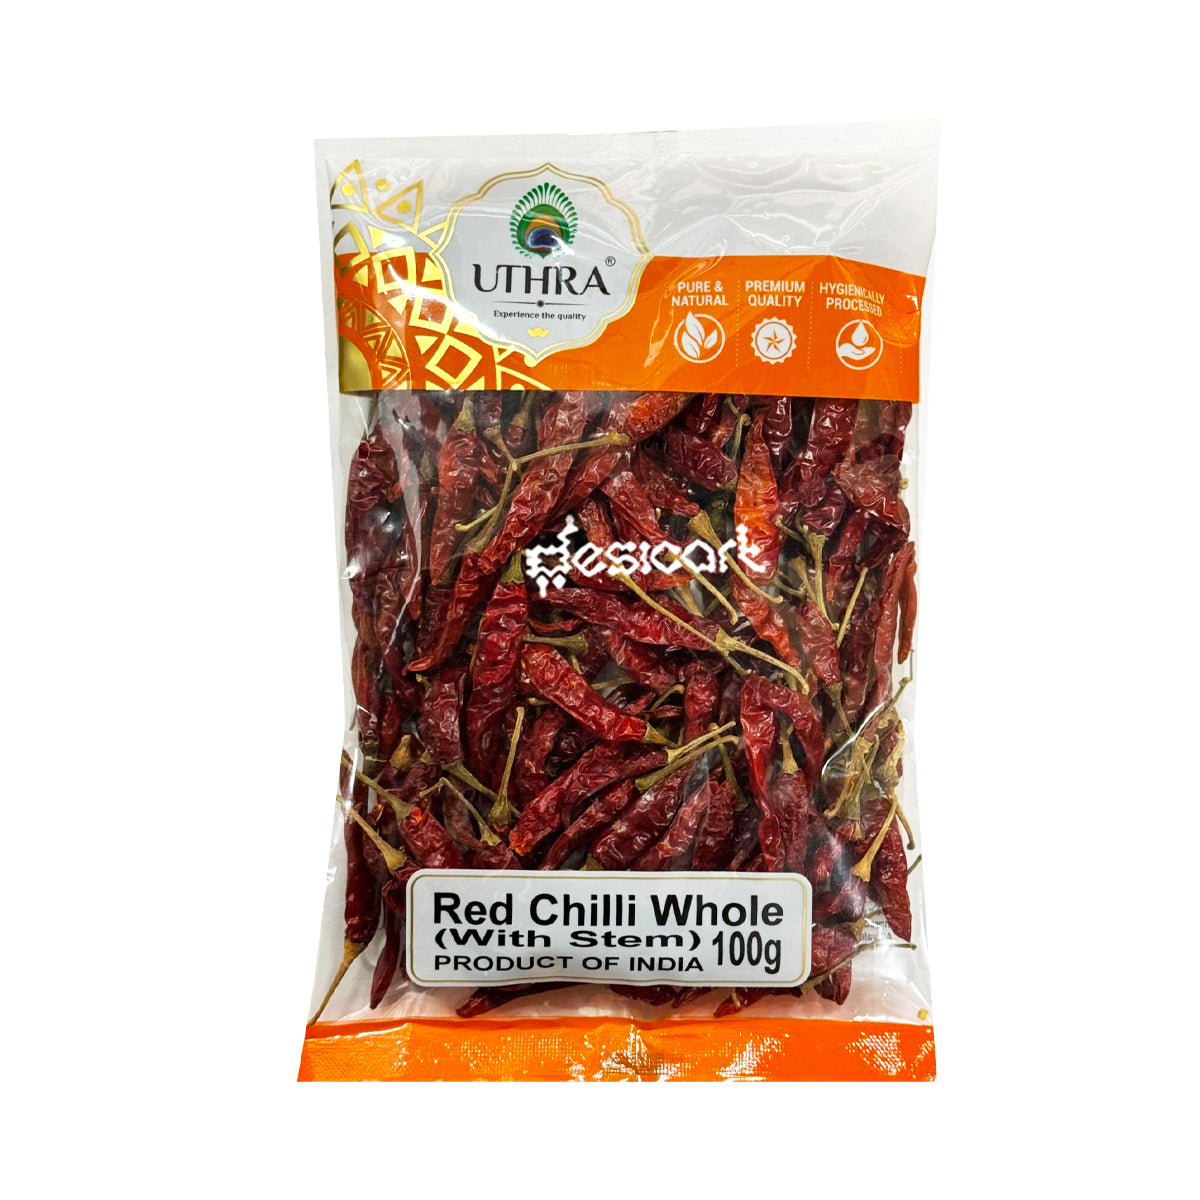 UTHRA CHILLI WHOLE WITH STEM 100G